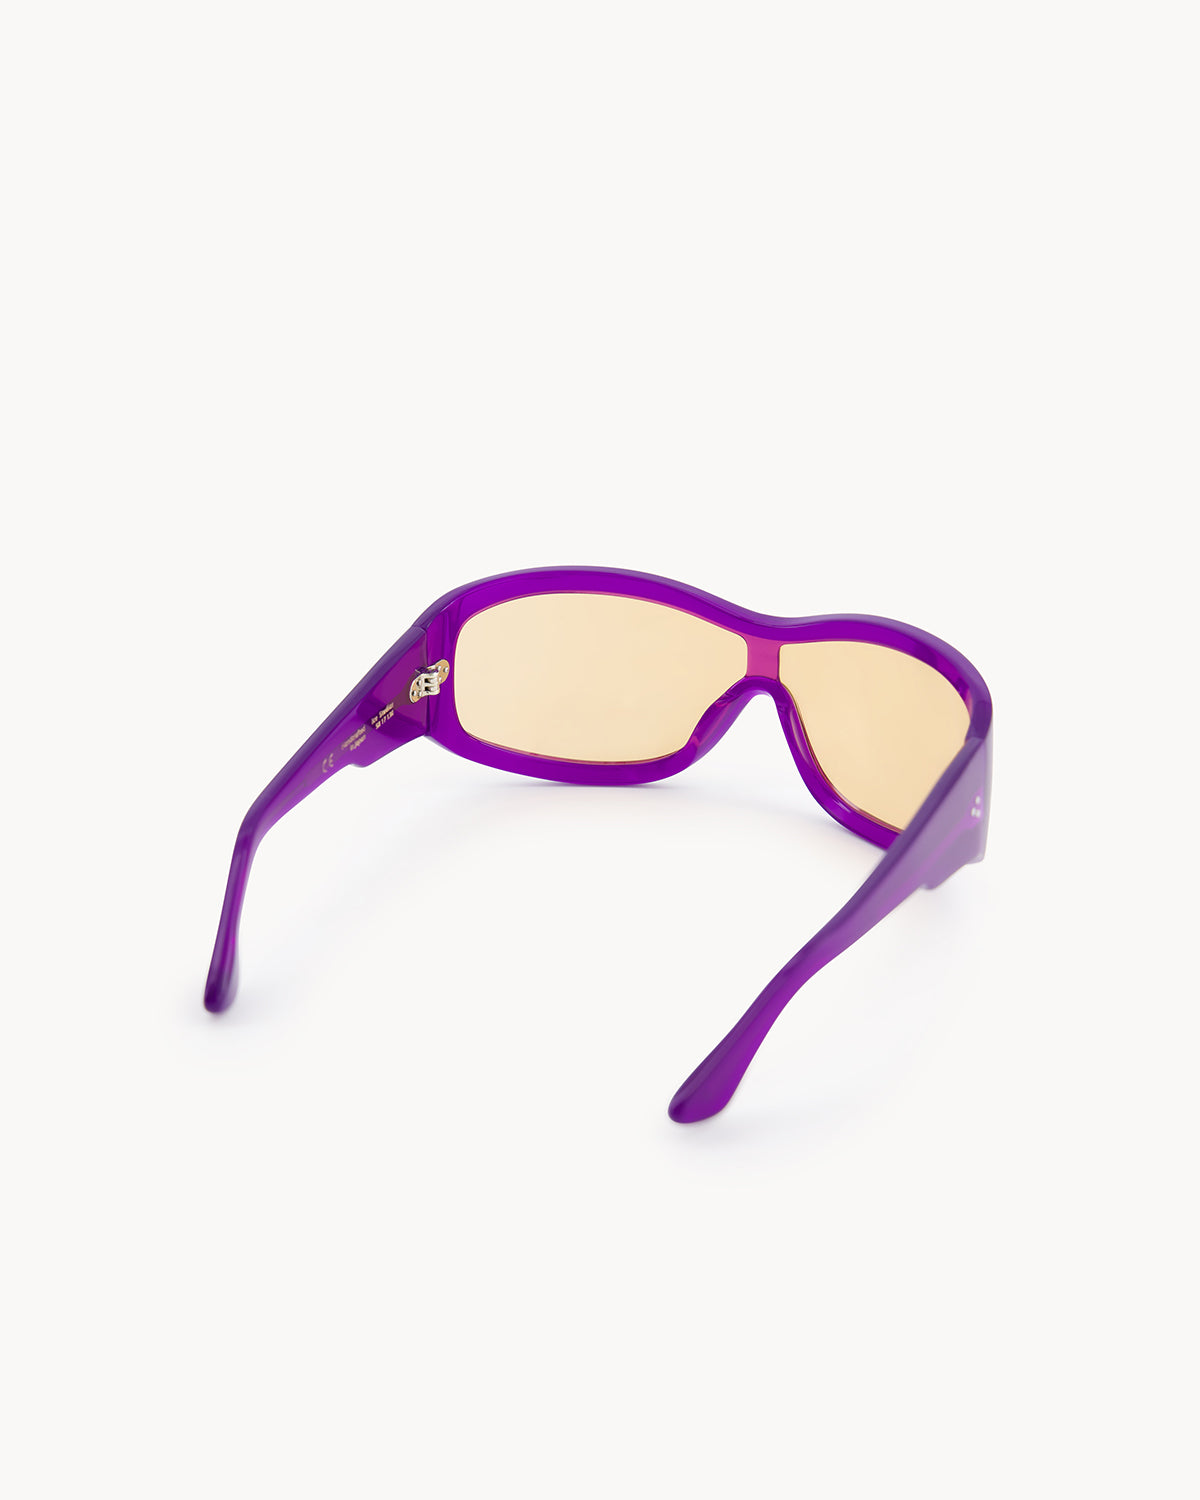 Port Tanger Nunny Sunglasses in Deep Purple Acetate and Amber Lenses 3